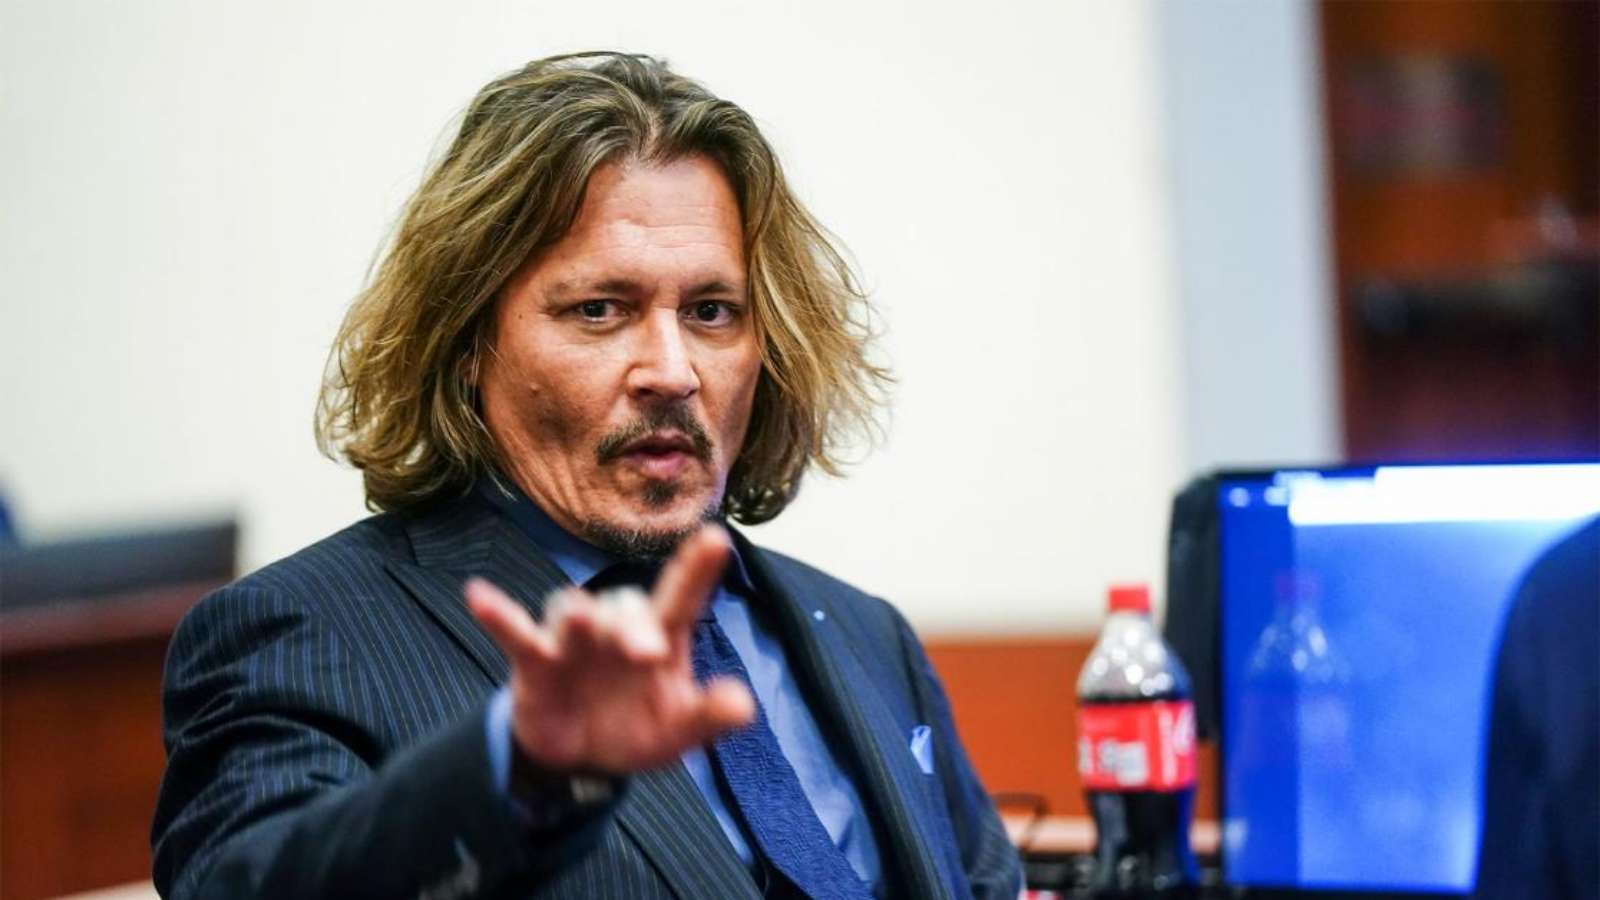 Johnny Depp at the trial